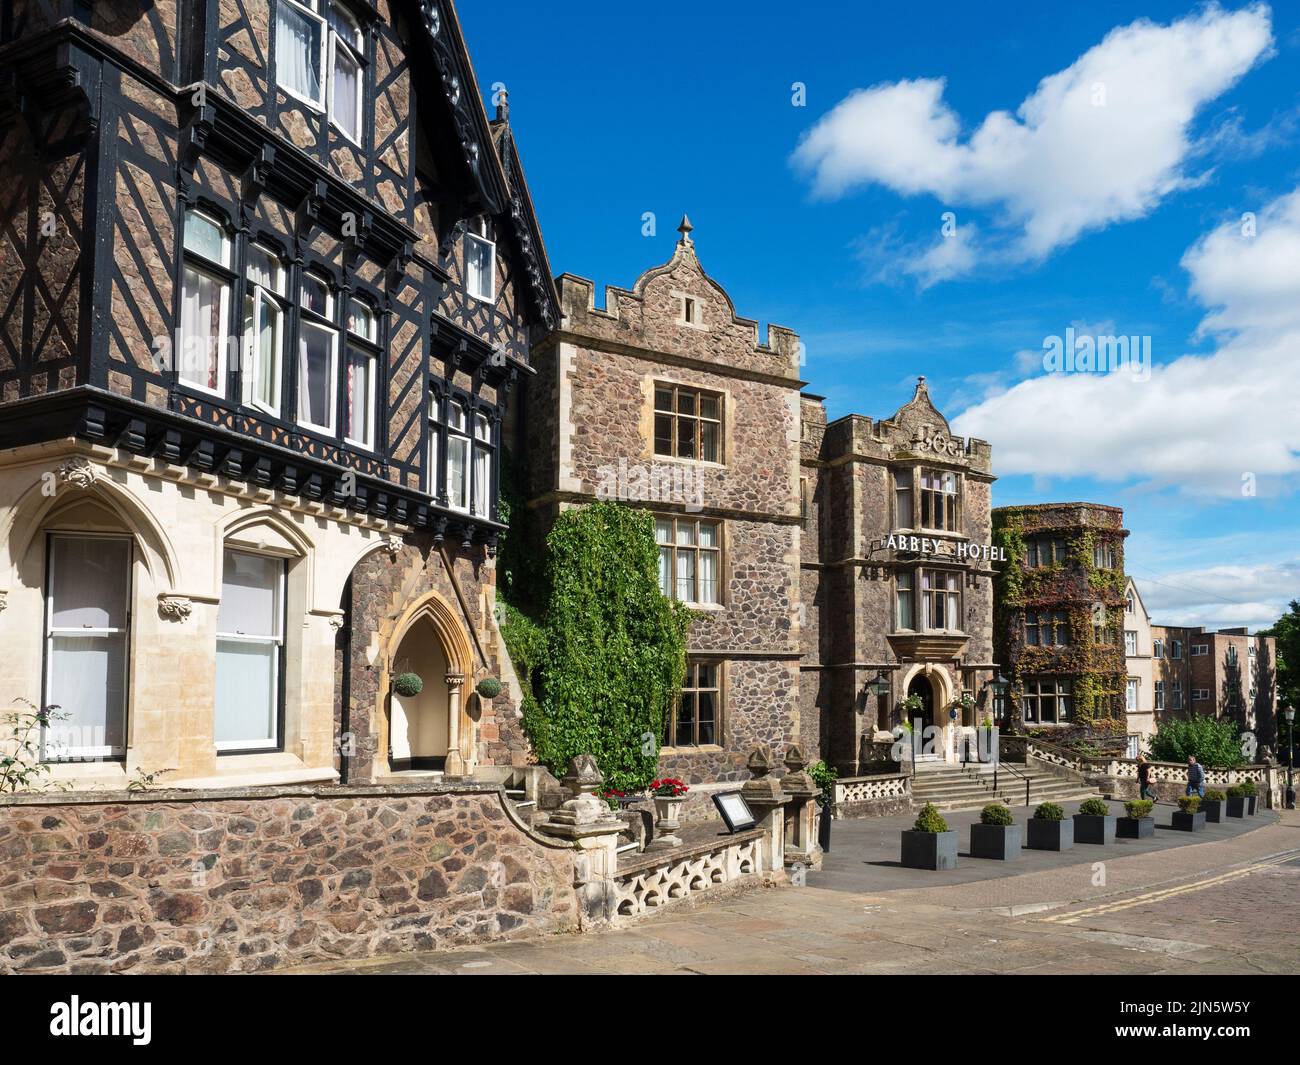 The Abbey Hotel listed building on Abbey Road in Great Malvern Worcestershire England Stock Photo